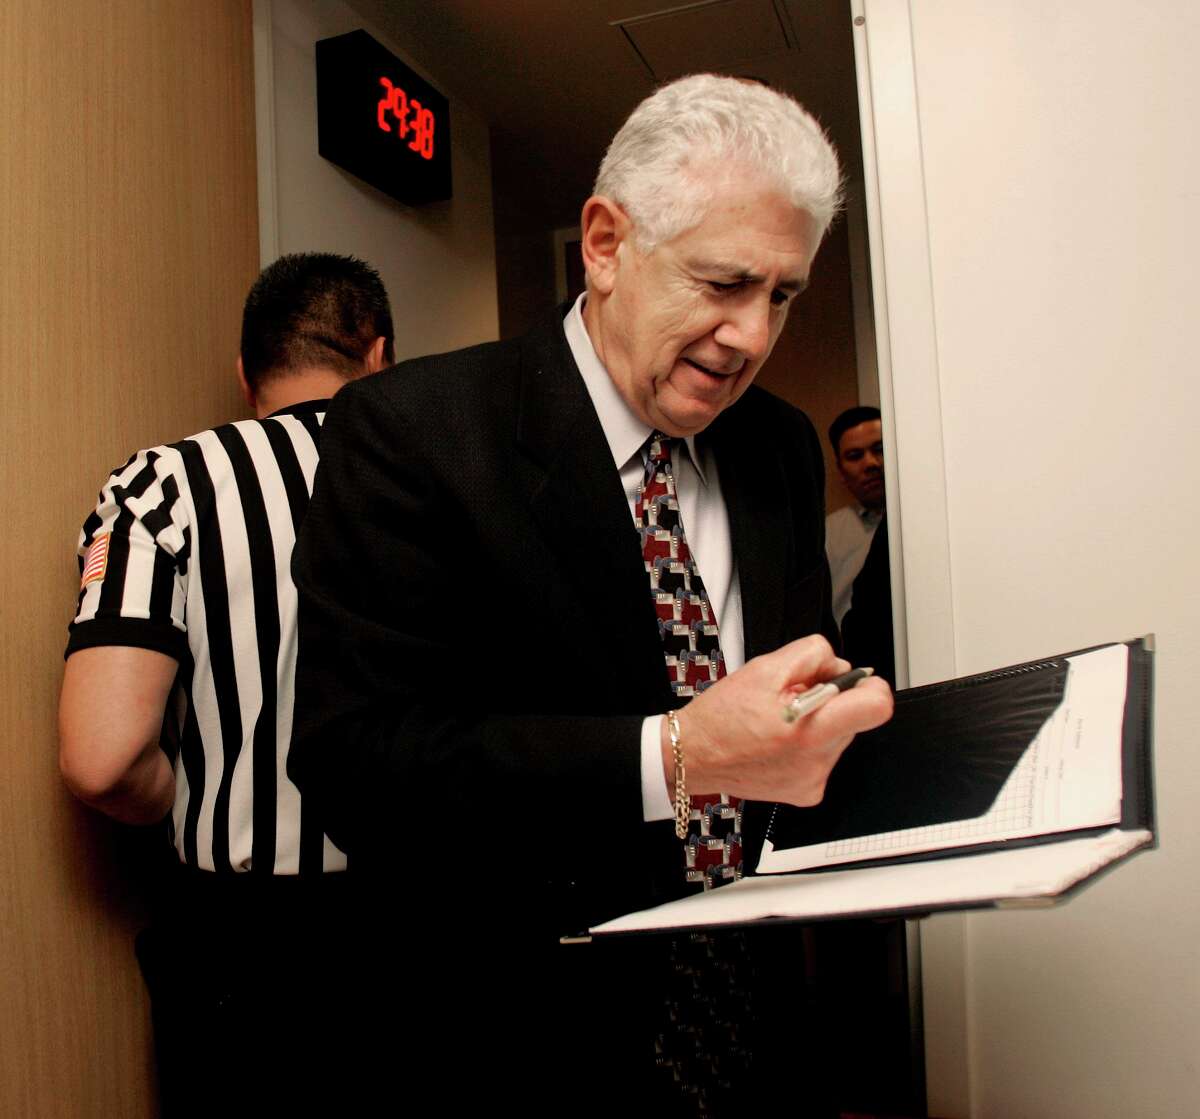 Lou Campanelli was the supervisor of officials for the Pac-10 from 2000 to 2006.